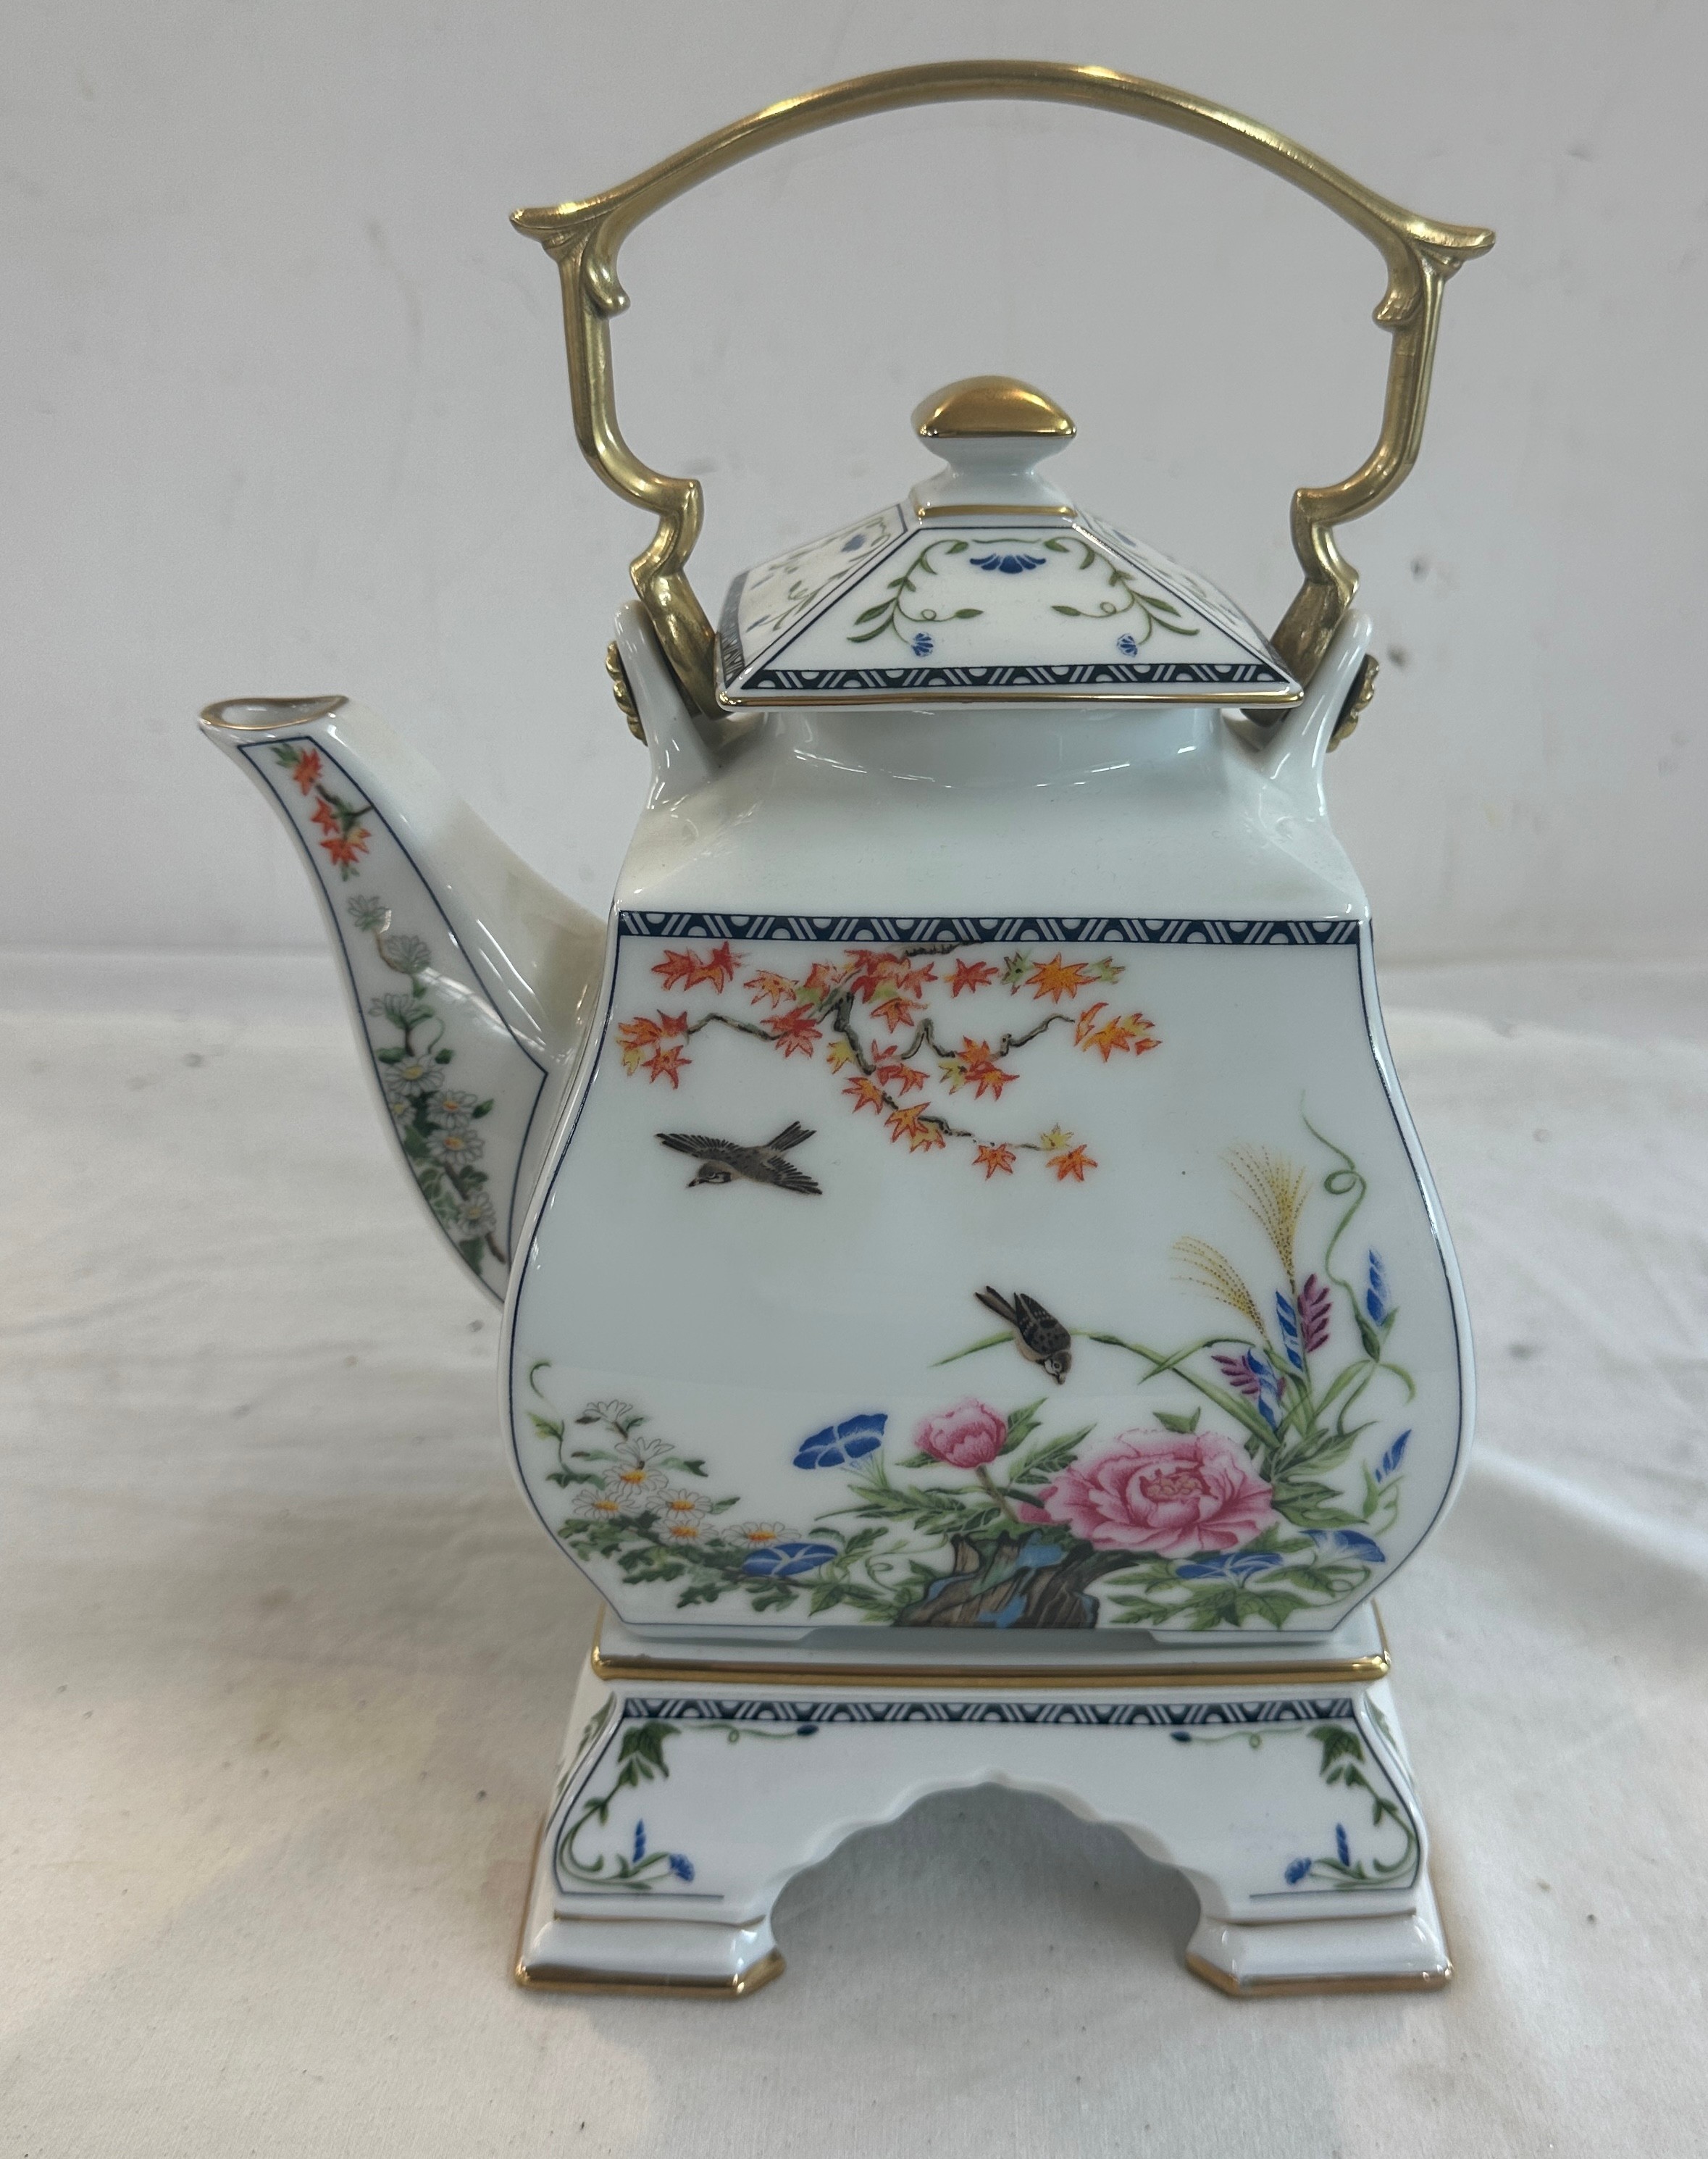 Franklin mint teapot "birds and flowers or the orient" designed by Naoko Nobata height 11 inches - Bild 6 aus 7